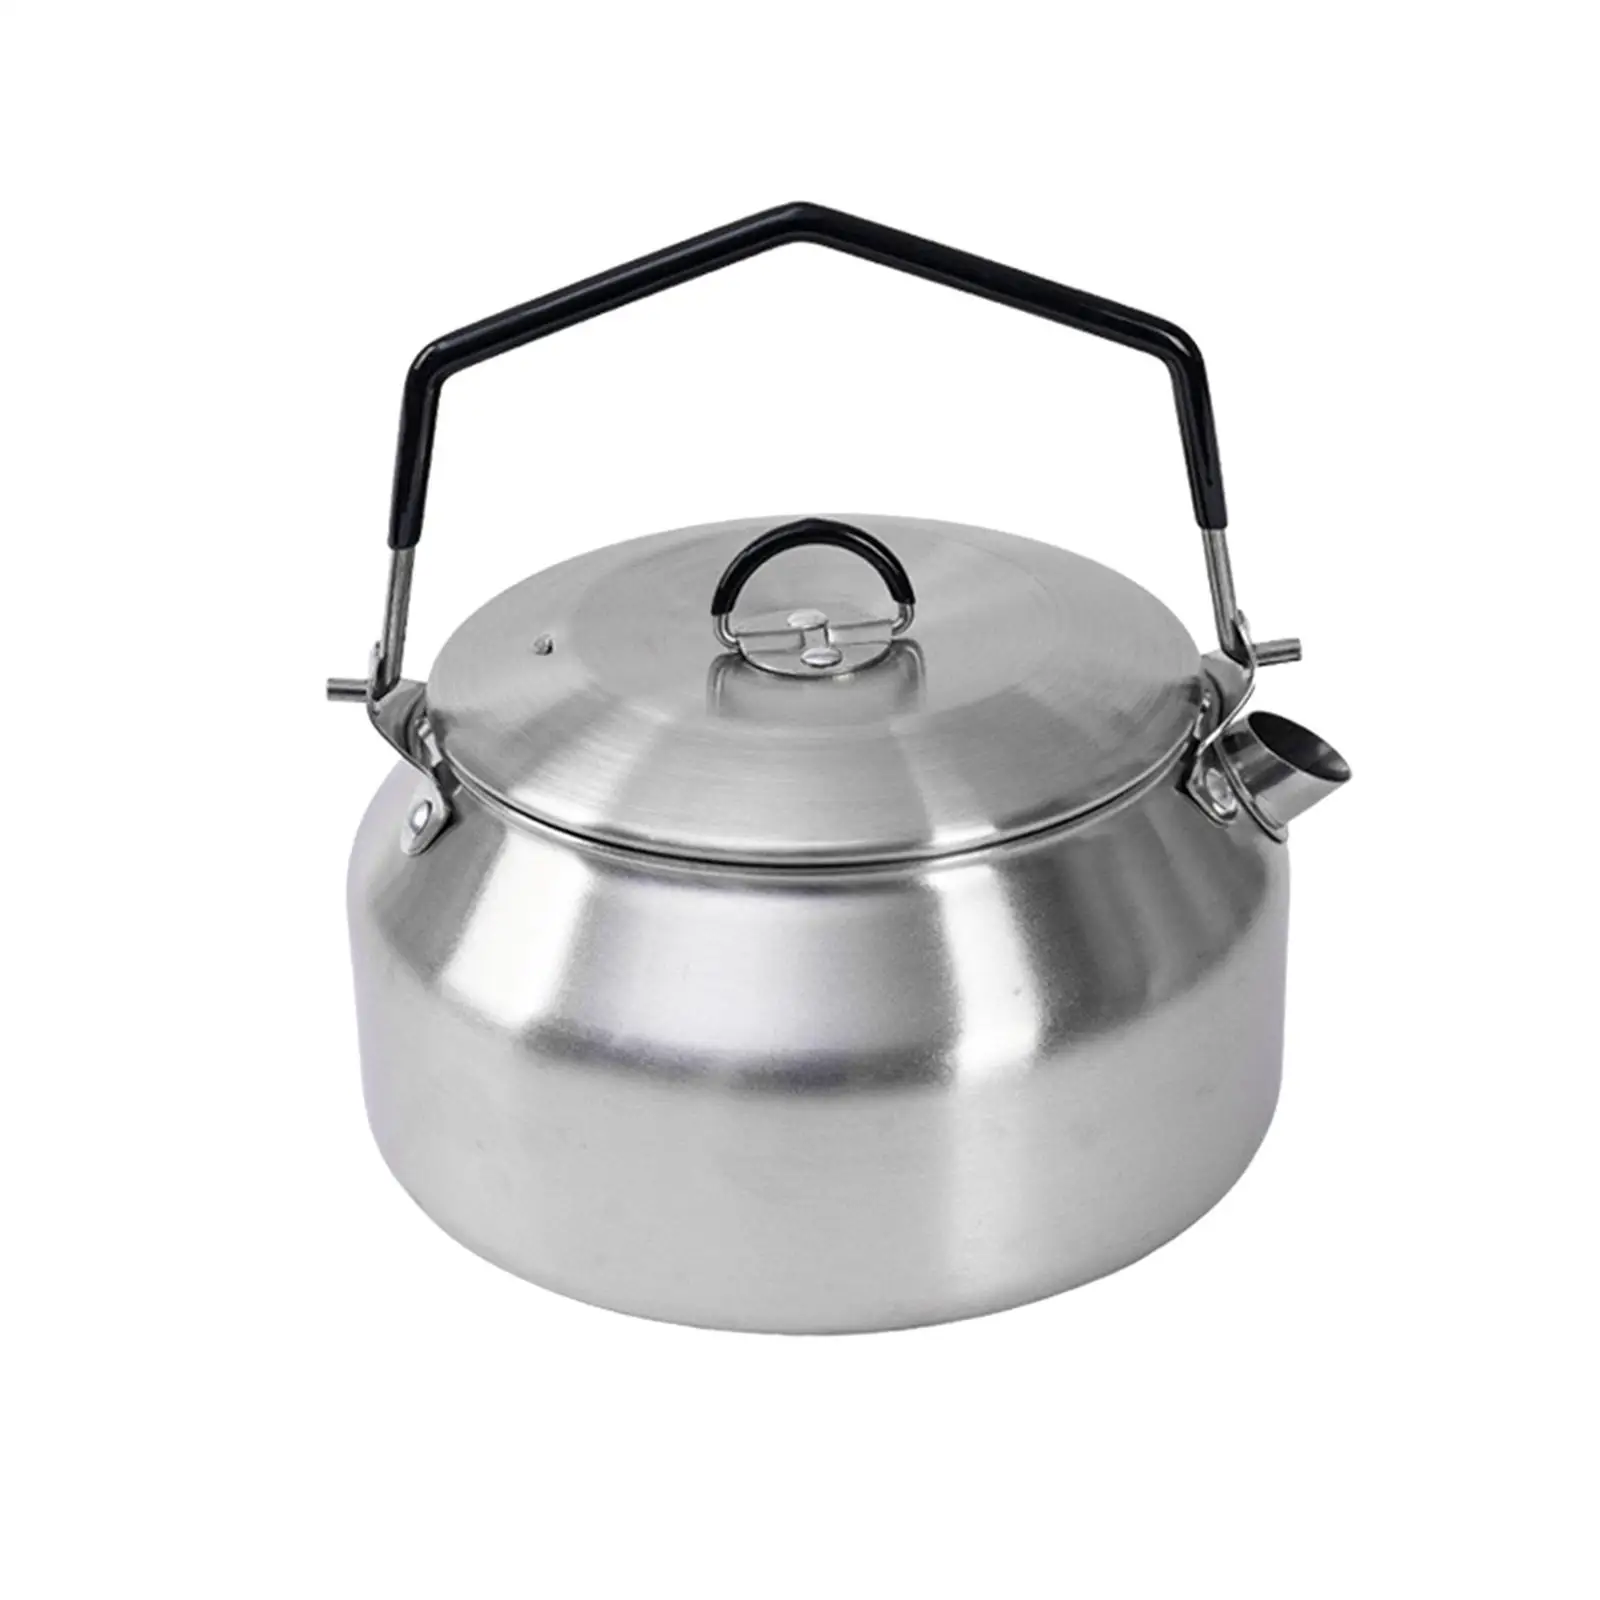 Camping Water Kettle Teapot Coffee Pot for Backpacking Hiking Barbecue